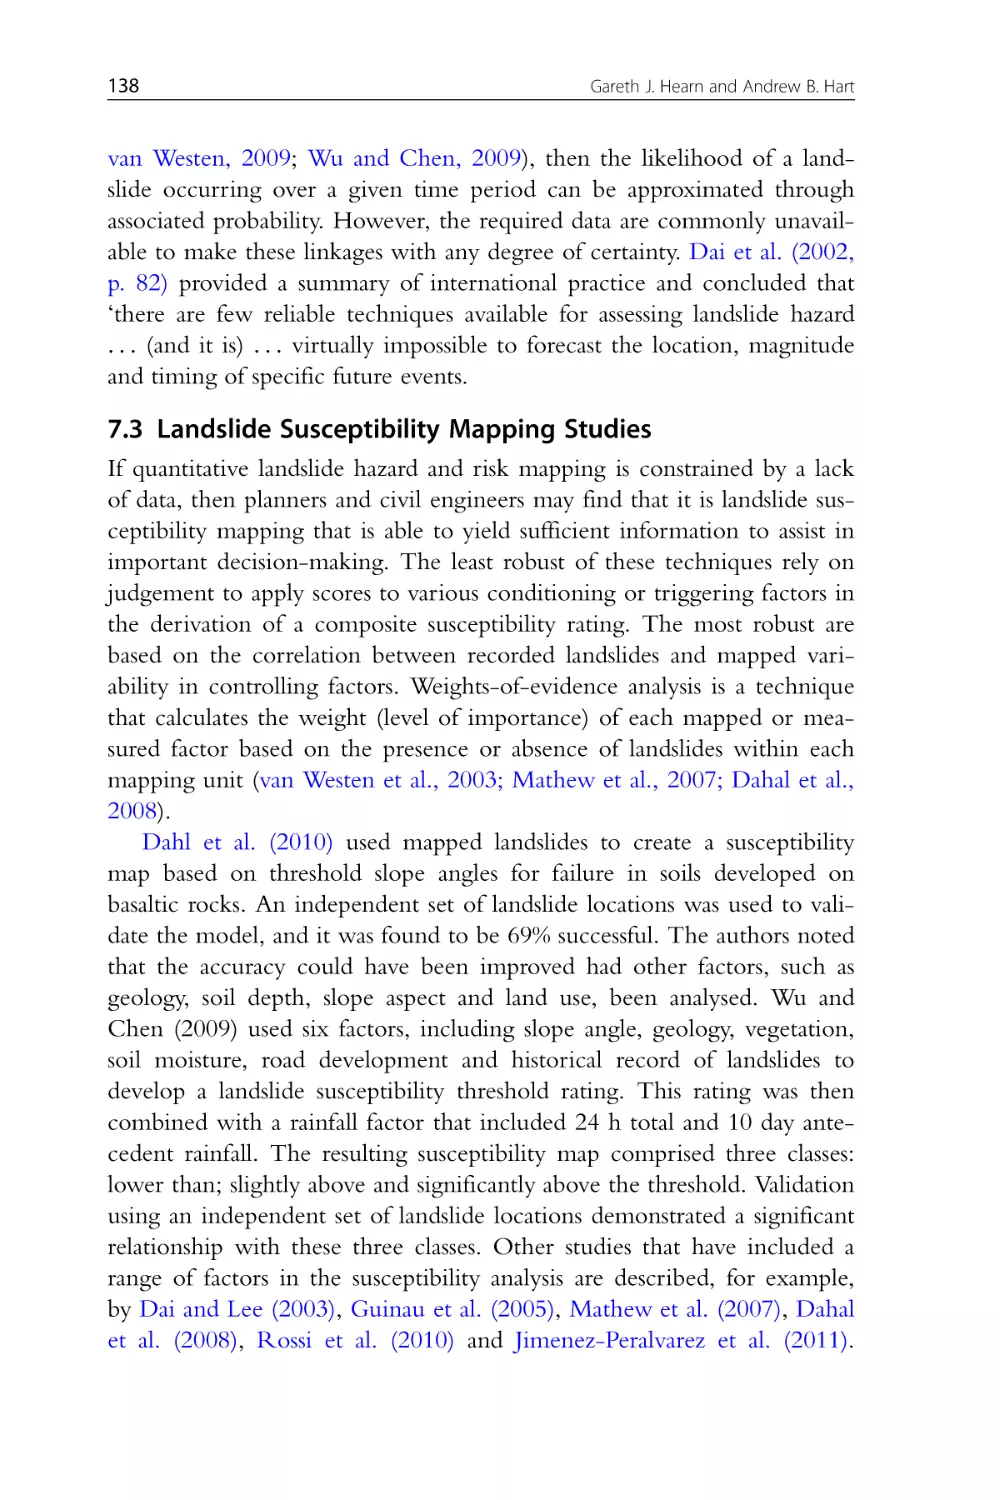 7.3 Landslide Susceptibility Mapping Studies